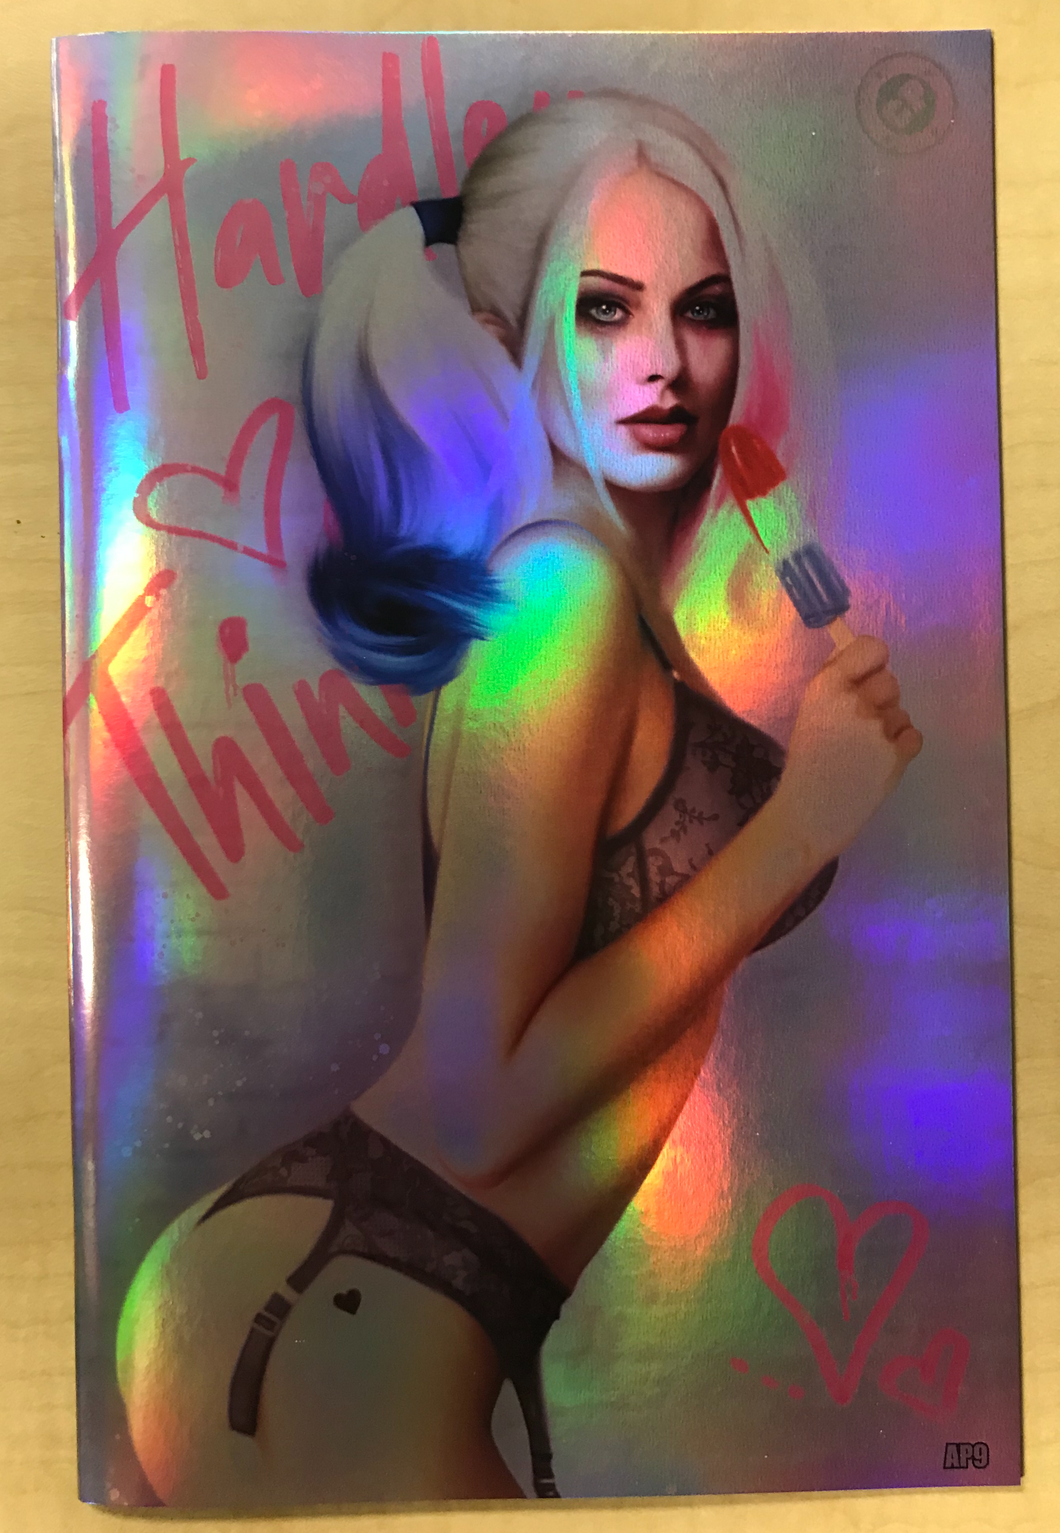 Hardlee Thinn #1 Nice Bomb Pop CHROME HOLOFOIL Variant Cover by Piper Rudich Artist Proof AP Only 10 Copes Made Forbidden Ink / Comics Elite Exclusive!!!